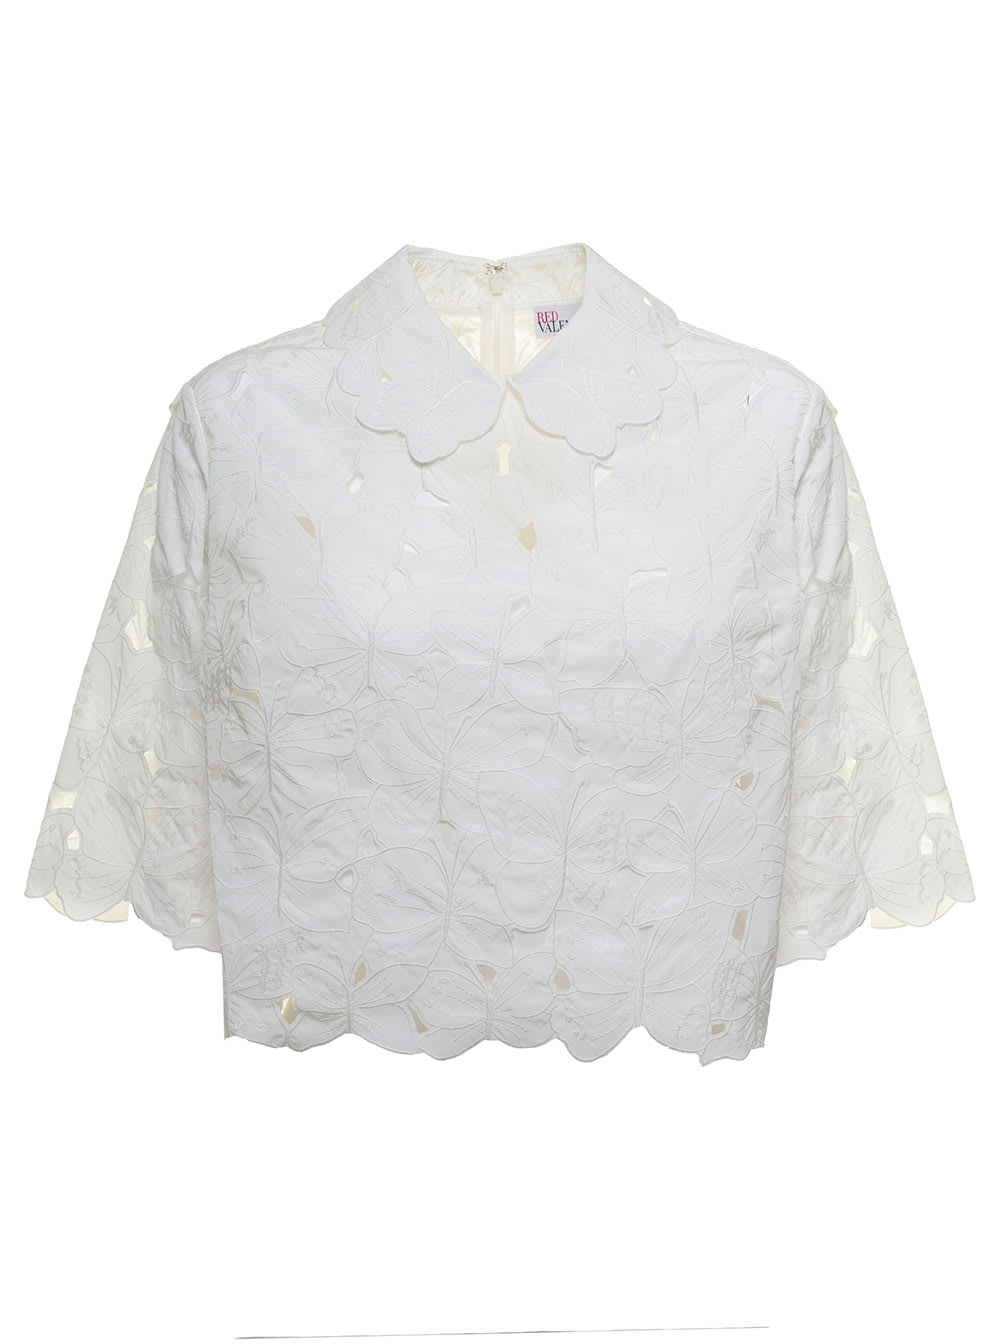 RED Valentino White Embroidered Butterfly Shirt